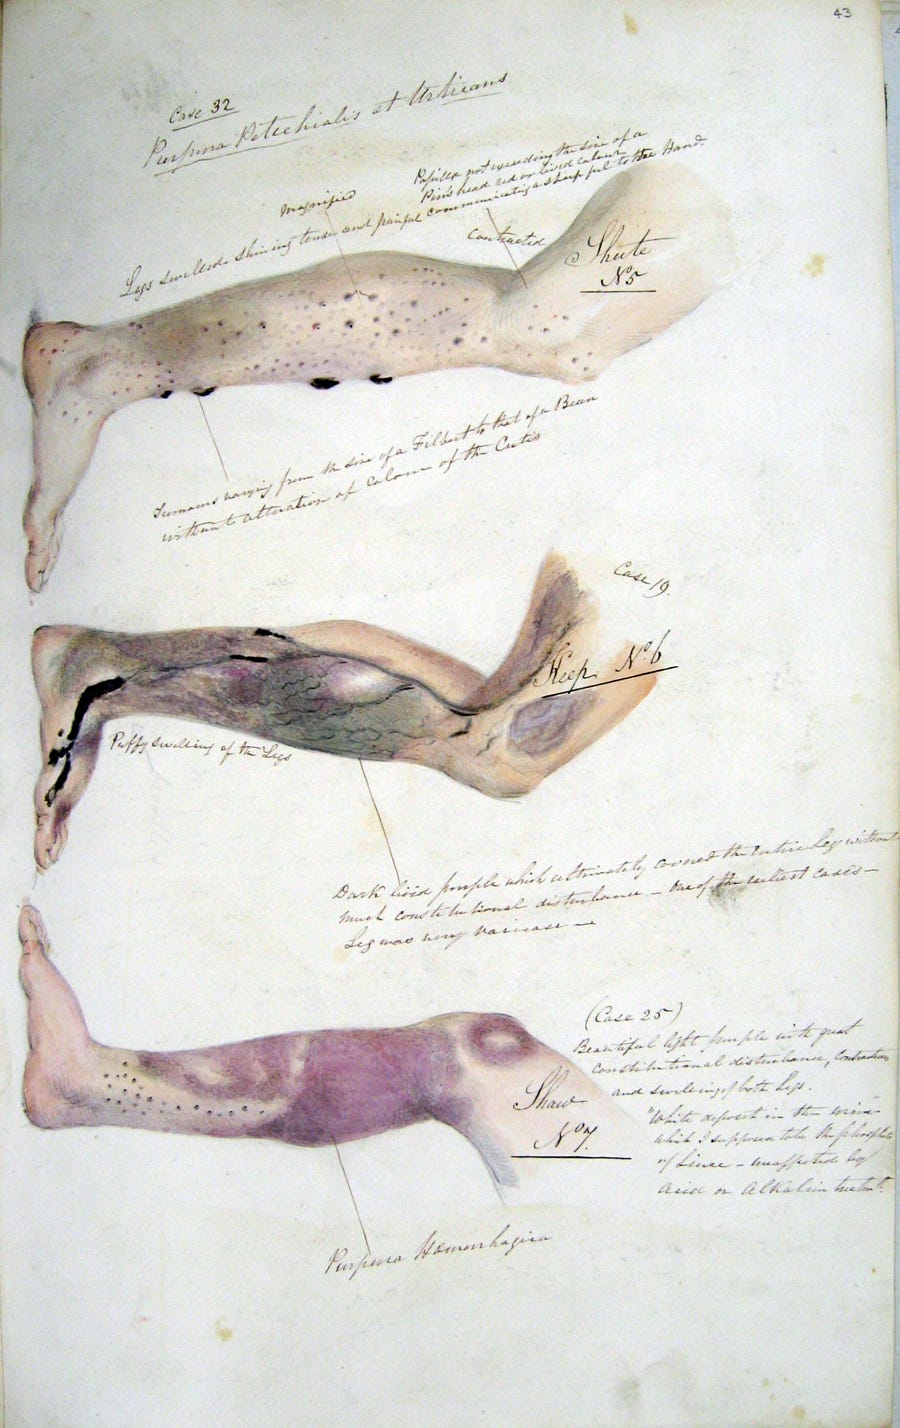 A page from Henry Walsh Mahon’s journal shows scurvy’s effects from his time aboard HM Convict Ship Barrosa. The image shows legs with three progressive stages of the disease and labels showing the lesions. The first leg has black papules; the second shows puffy swelling with dark purple streaks; the third shows blotches of purple ecchymosis (bleeding) in the skin.